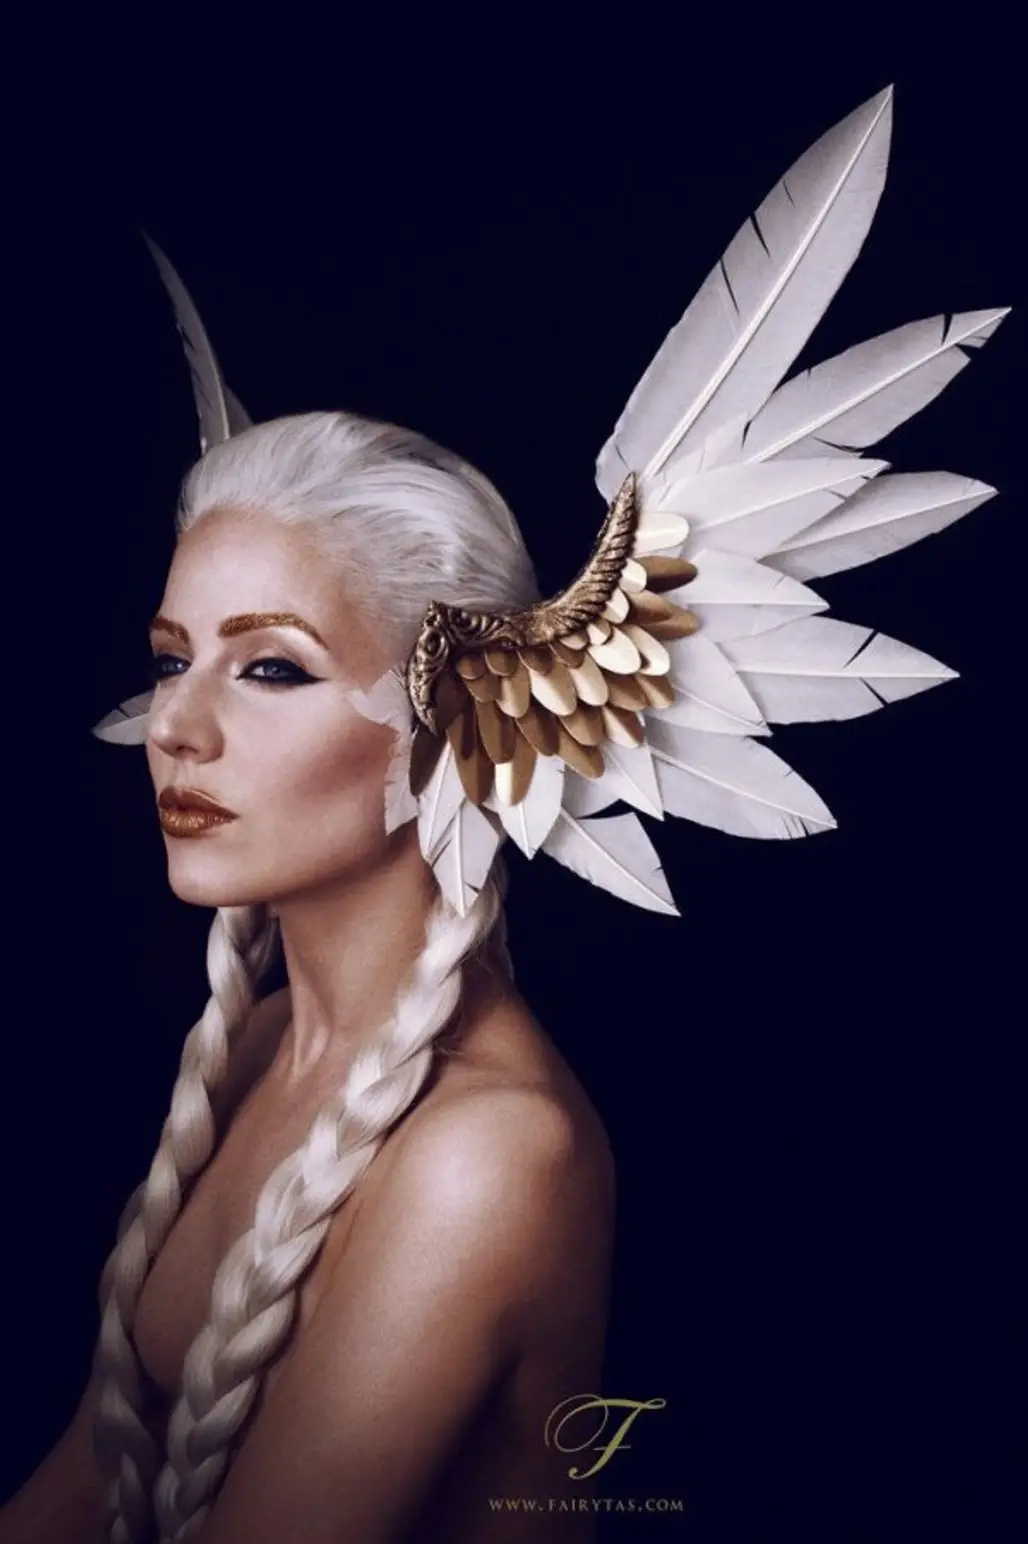 This Valkyrie Headdress is Just Cool to Look at